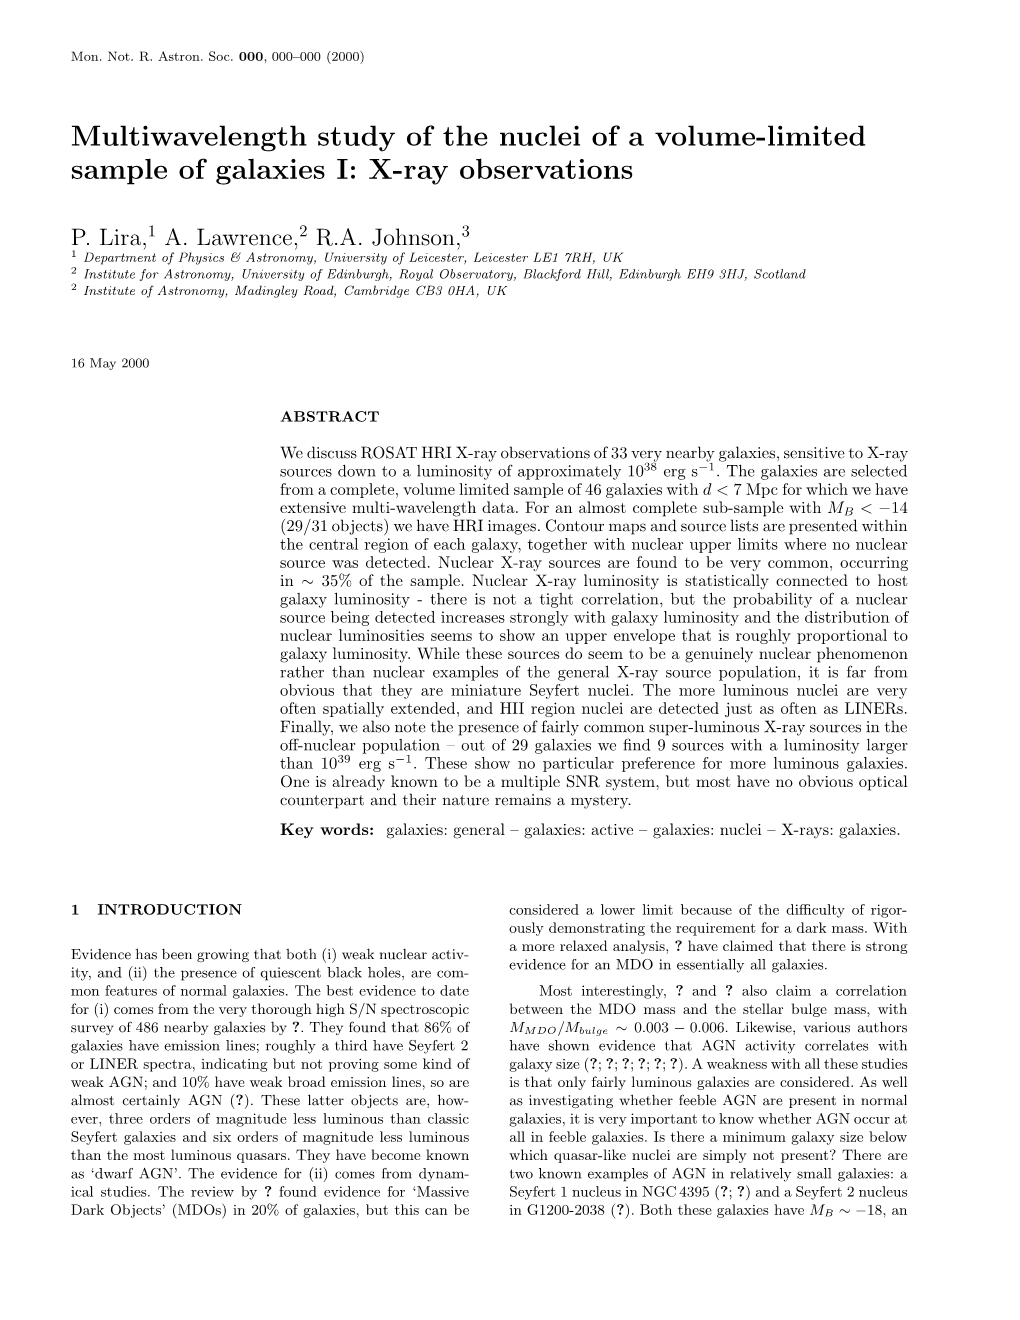 Multiwavelength Study of the Nuclei of a Volume-Limited Sample of Galaxies I: X-Ray Observations